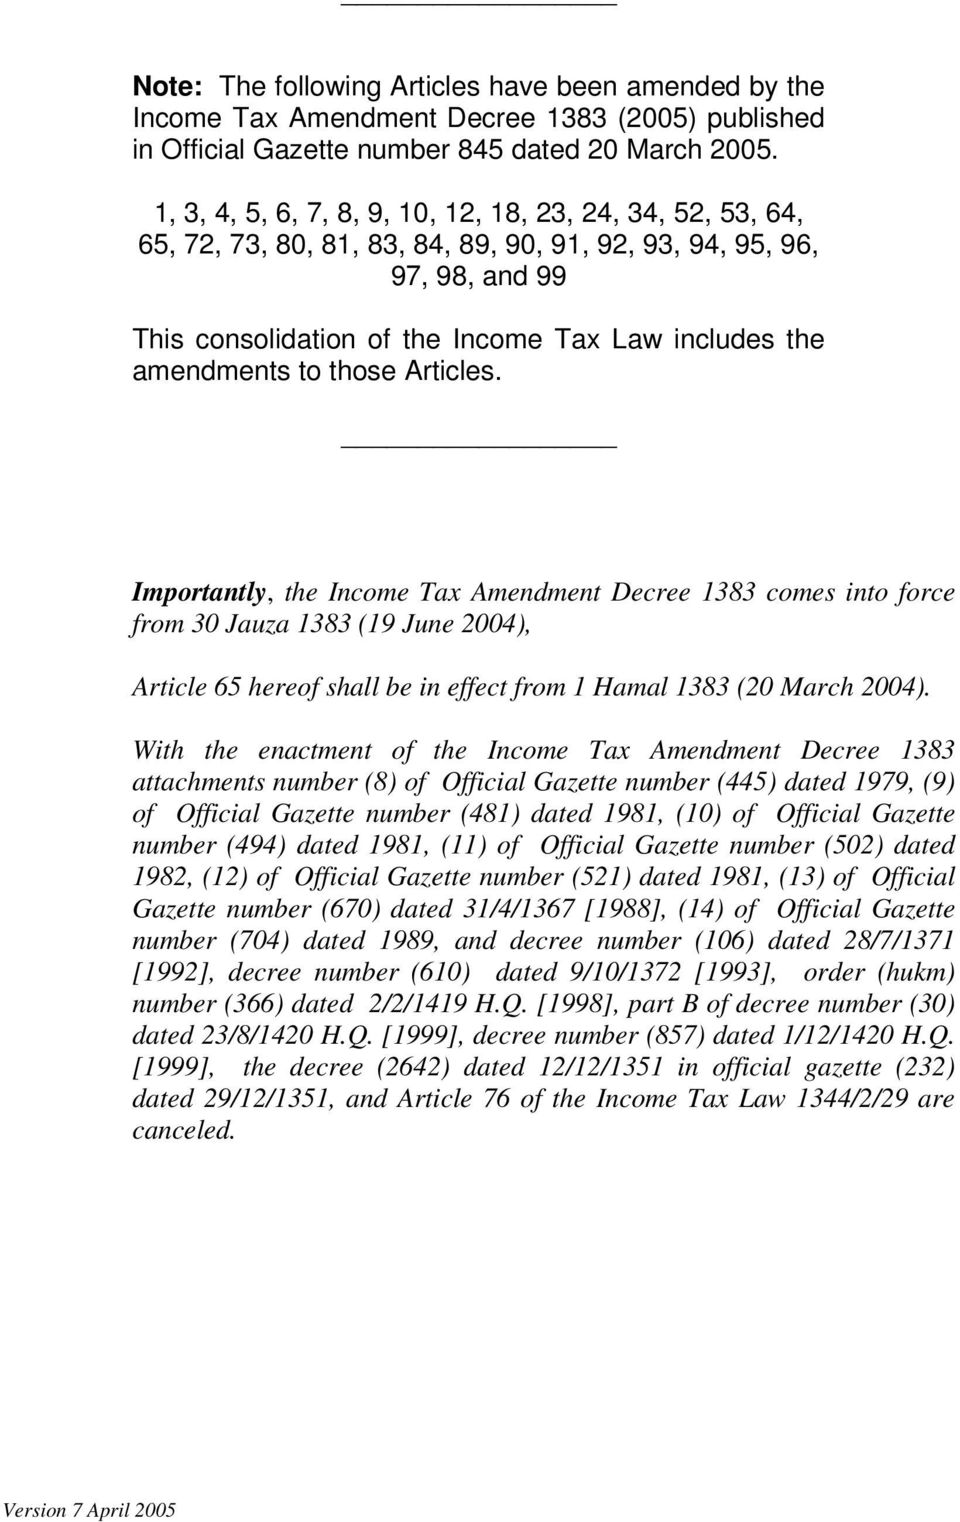 to those Articles. Importantly, the Income Tax Amendment Decree 1383 comes into force from 30 Jauza 1383 (19 June 2004), Article 65 hereof shall be in effect from 1 Hamal 1383 (20 March 2004).